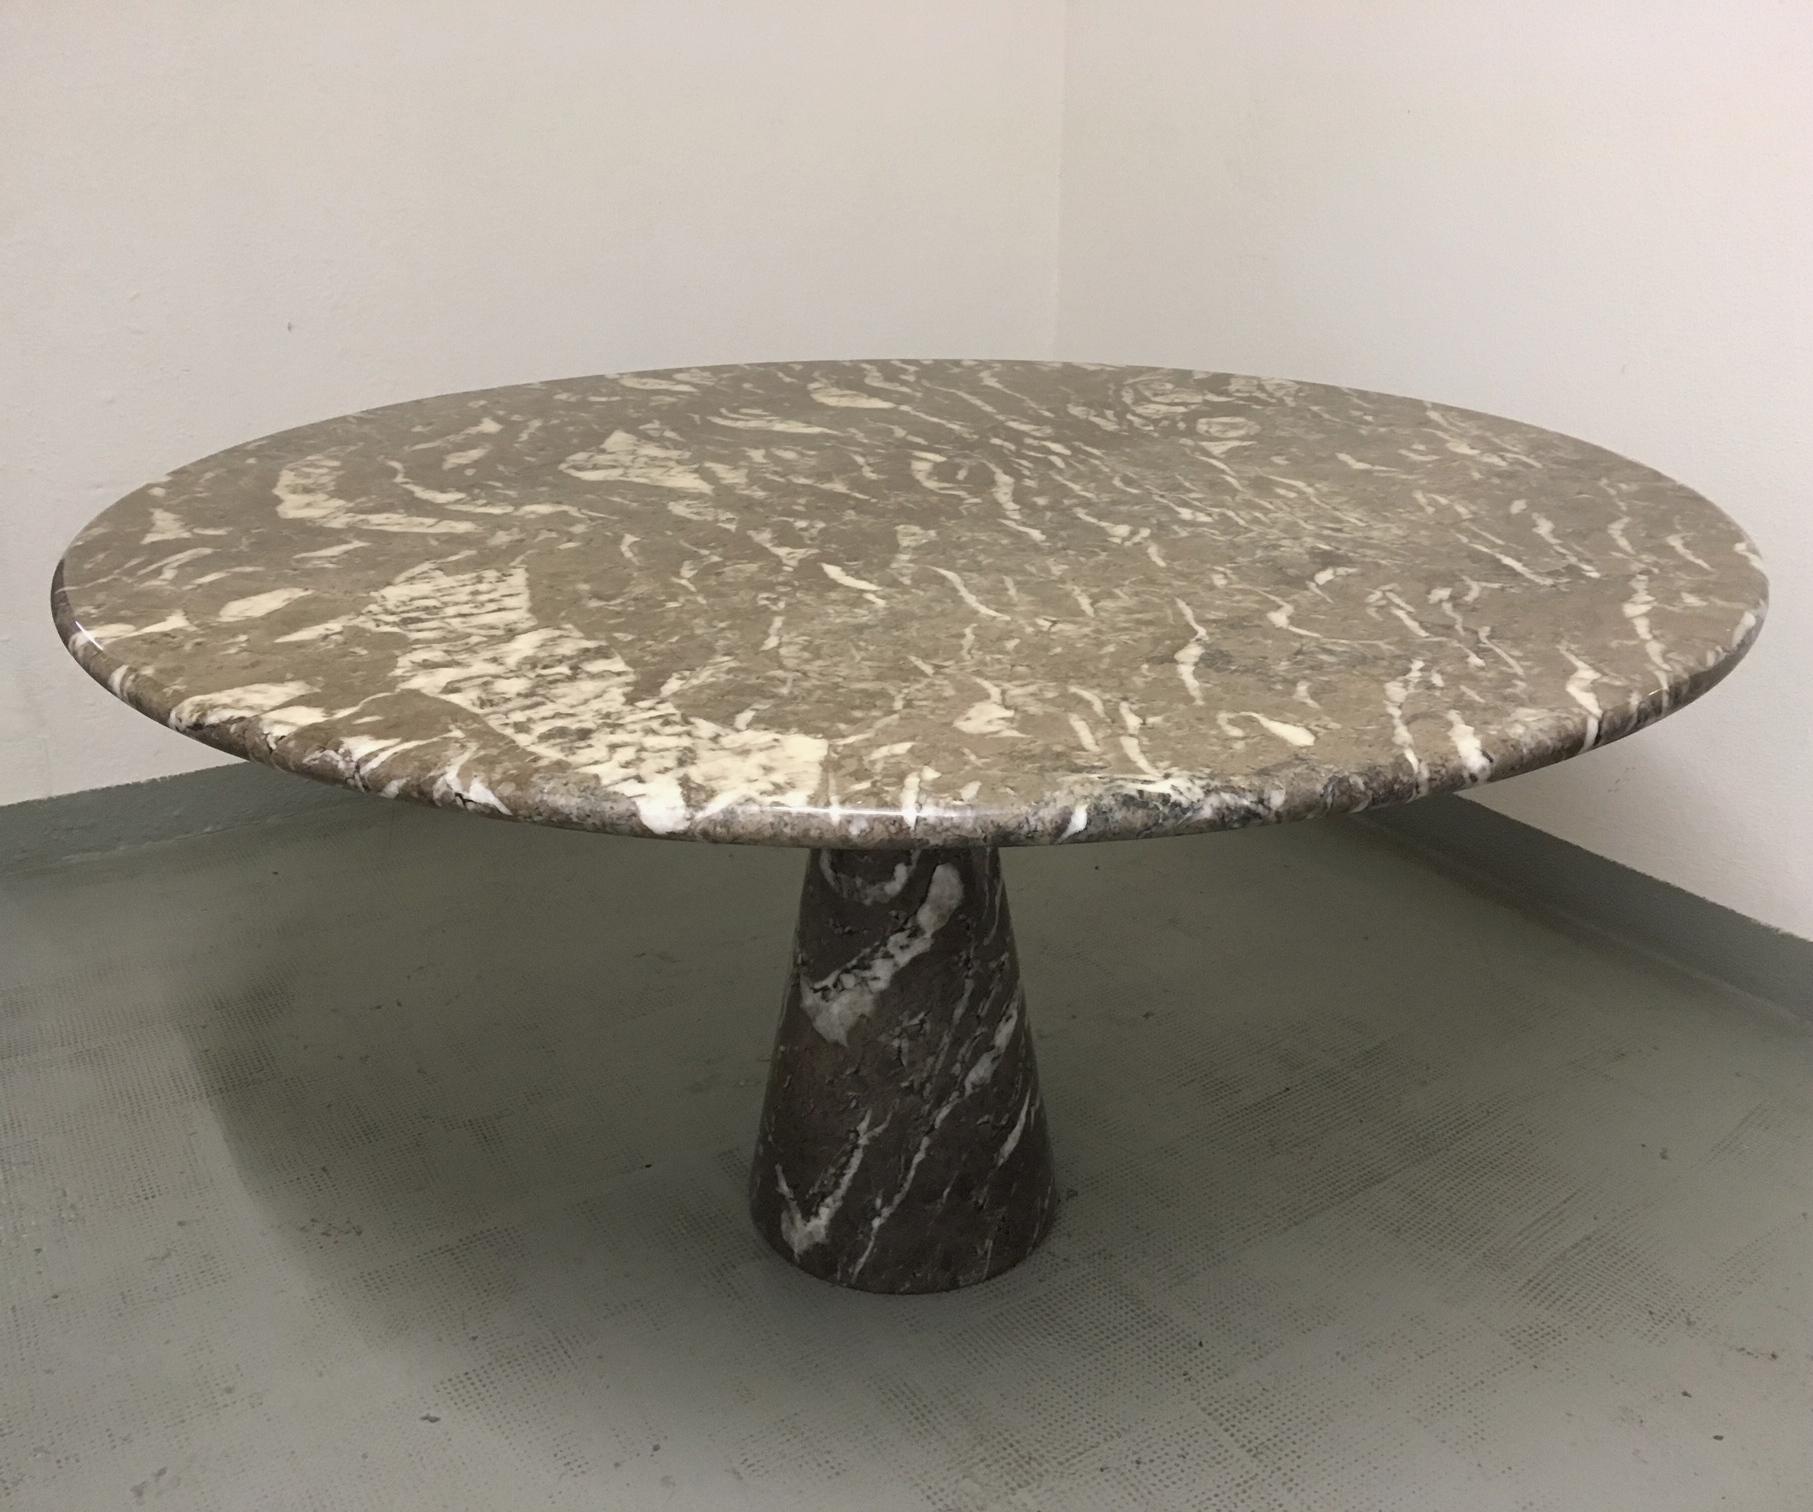 Angelo Mangiarotti pedestal marble circular table, produced by Skipper, Italy, 1970s.
The tabletop present a damage on the edge (pictures) but remains fully functional,
Patterned grey / white
Measures: 130 cm diameter / 72 cm high.